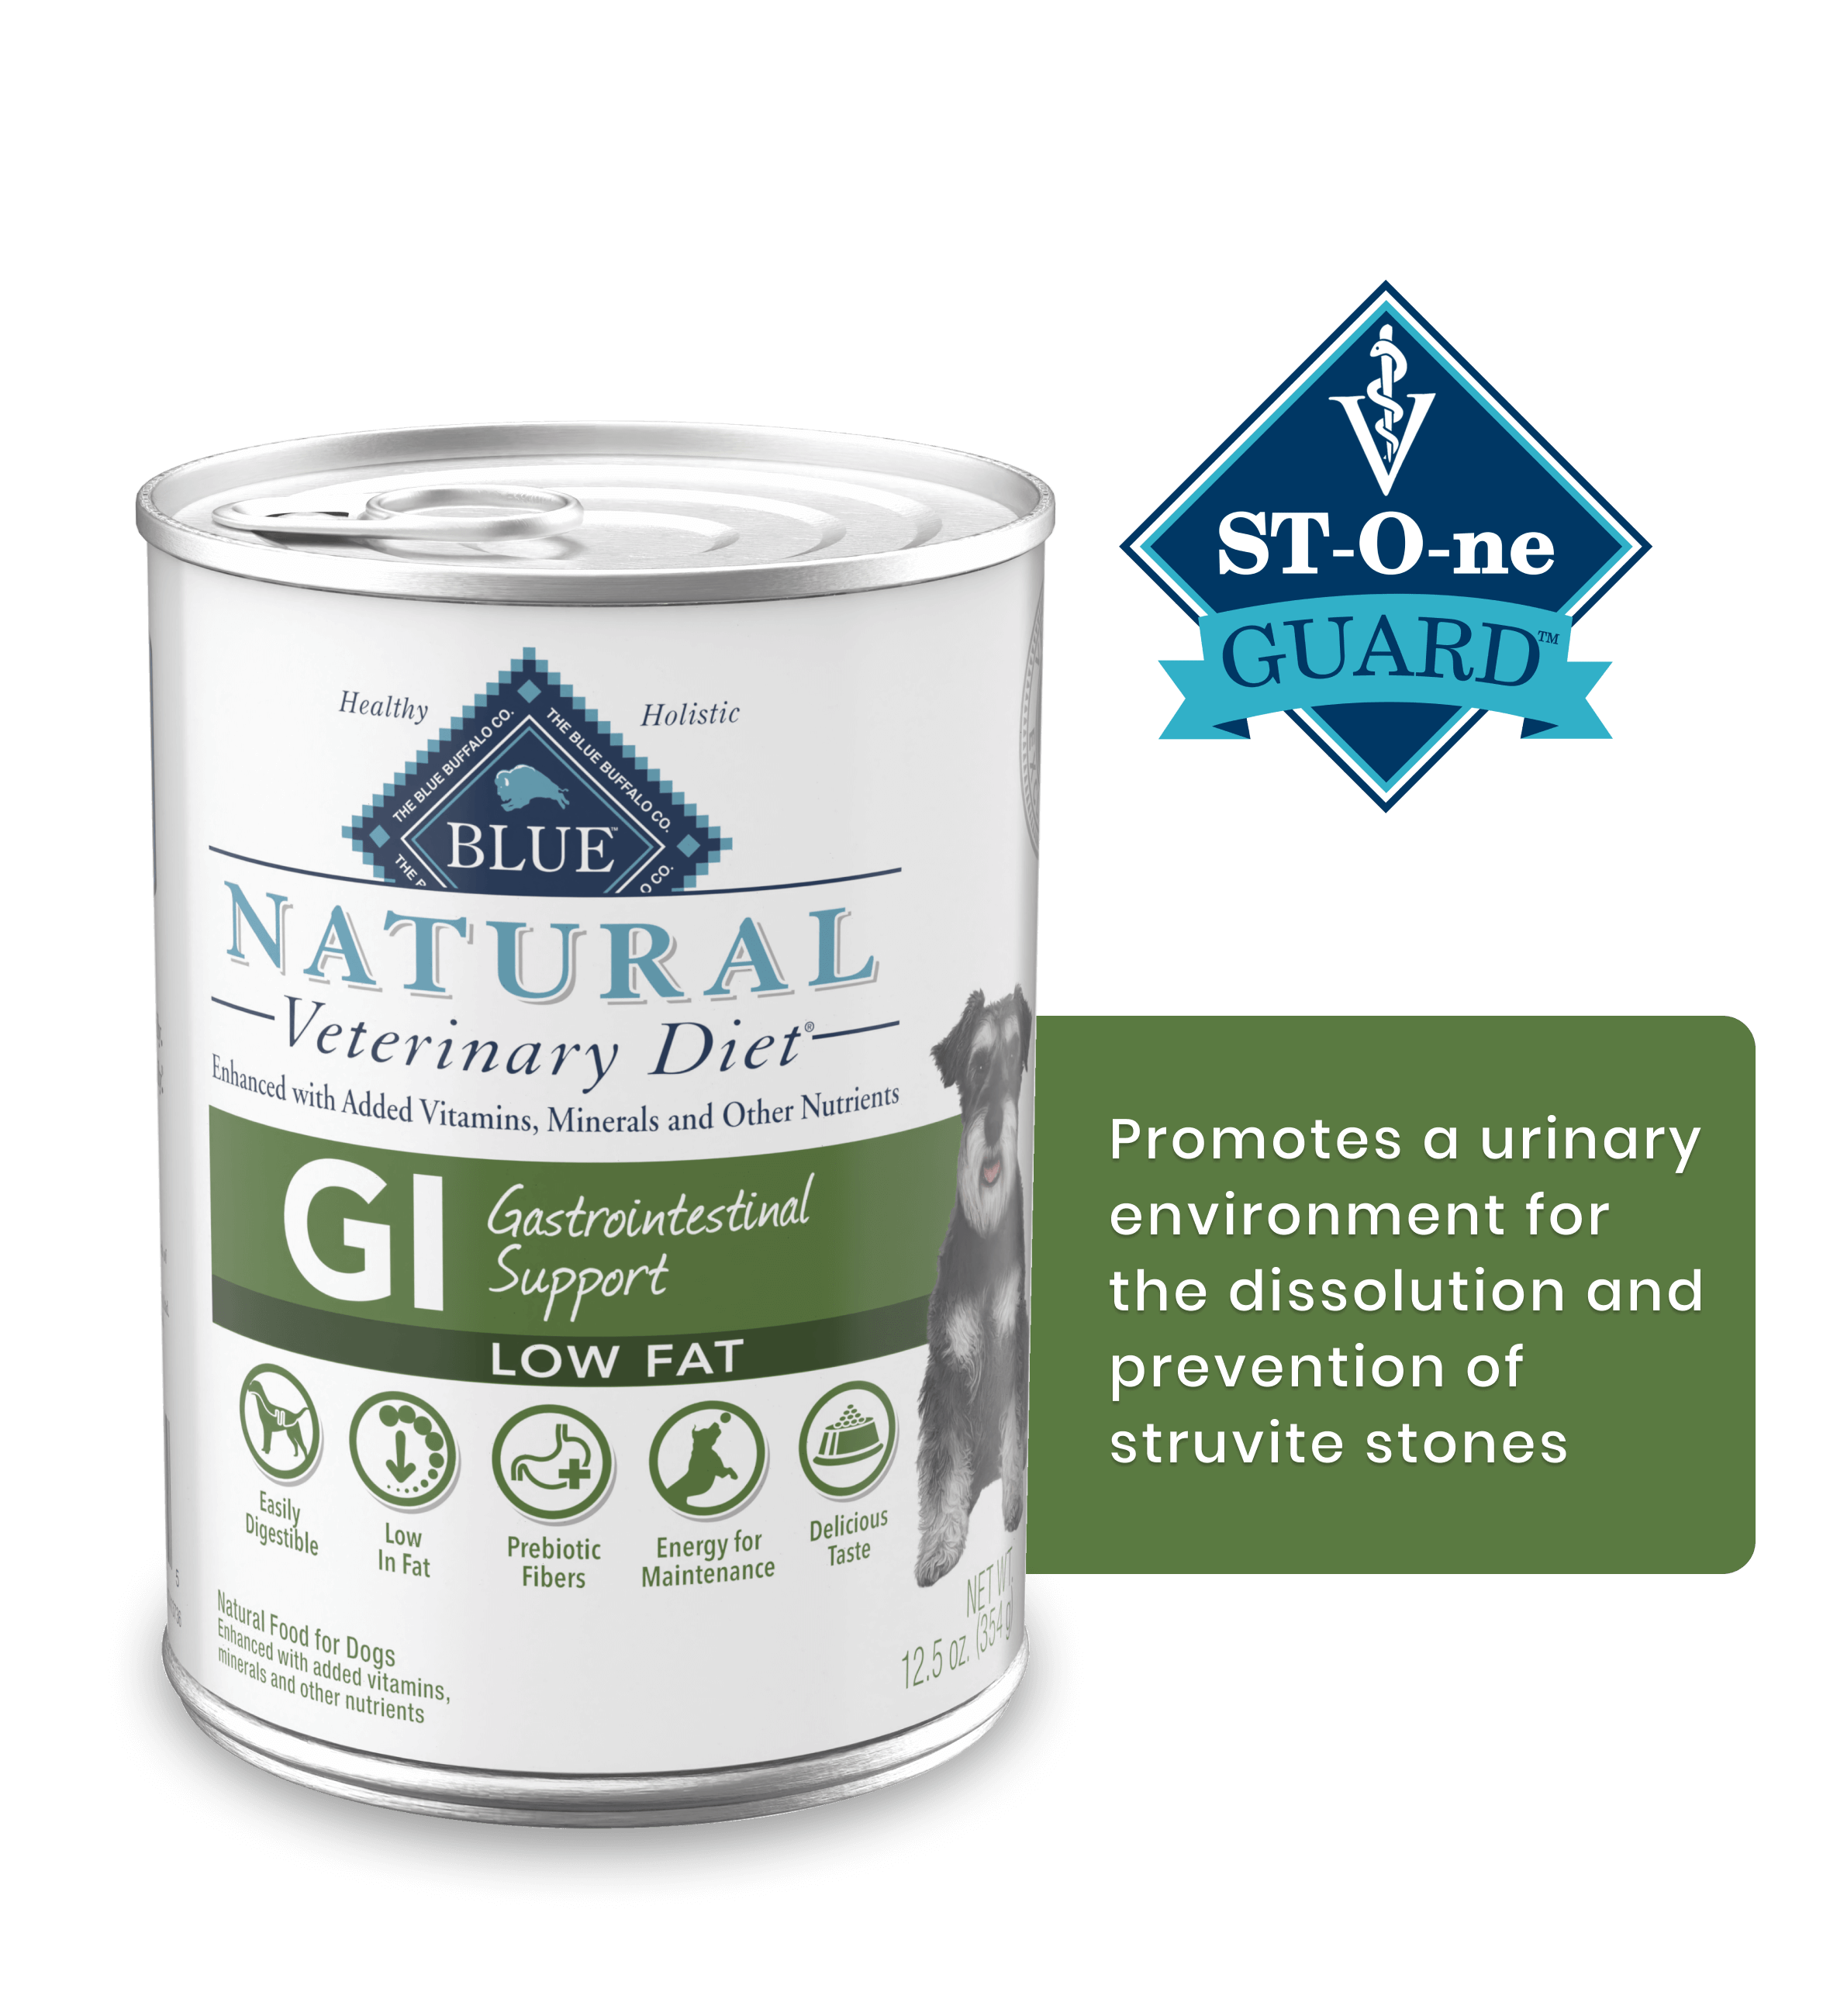 GI Gastrointestinal Support Low Fat St-O-ne Guard Promotes a urinary environment for the dissolution and prevention of struvite stones